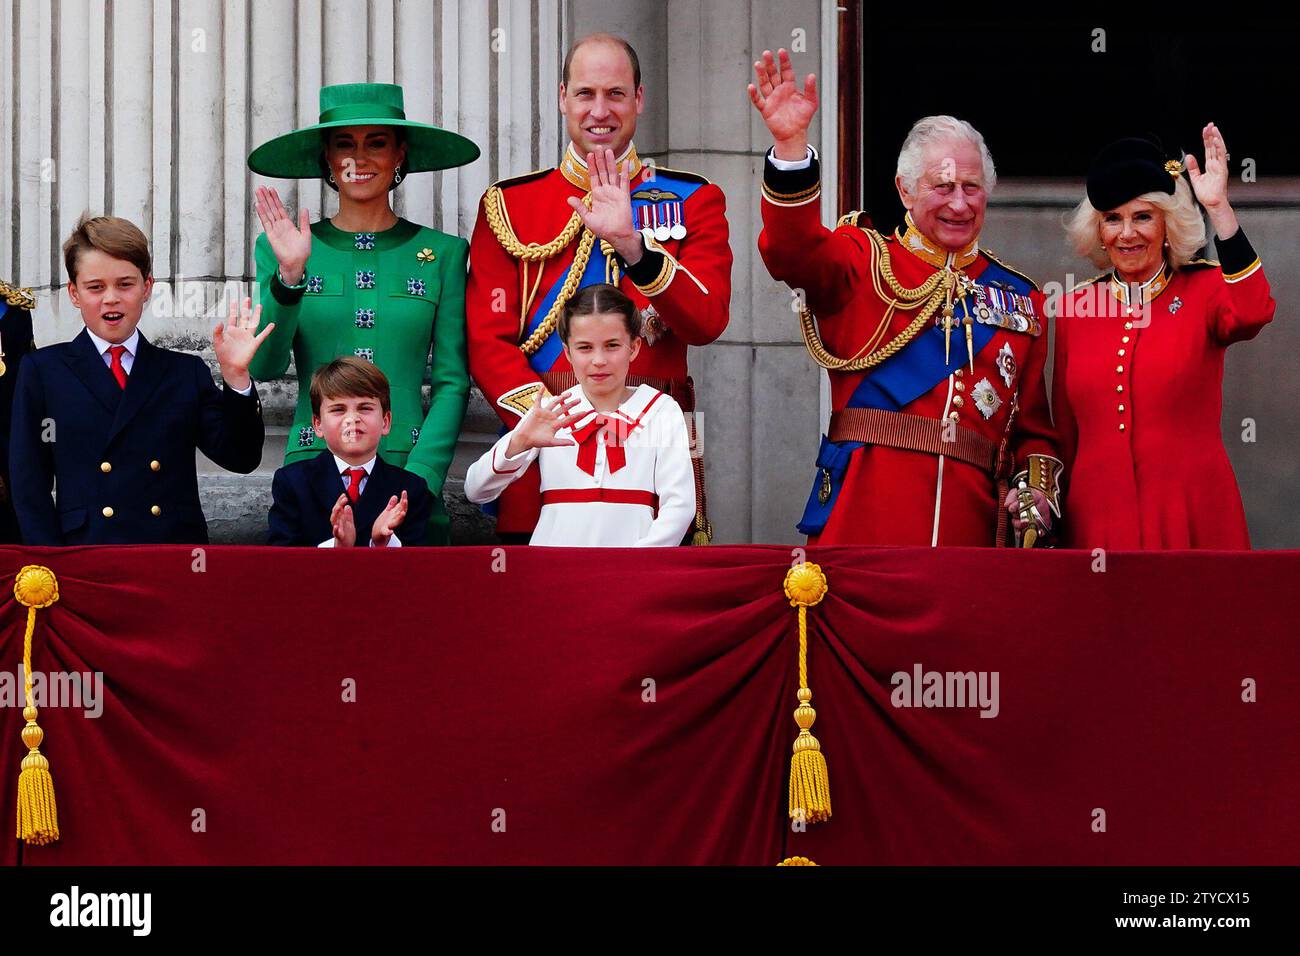 File photo dated 17/06/23 of (left to right) Prince George, the Princess of Wales, Prince Louis, the Prince of Wales, Princess Charlotte, King Charles III and Queen Camilla on the balcony of Buckingham Palace, London, to view the flypast following the Trooping the Colour ceremony in central London, as King Charles III celebrates his first official birthday since becoming sovereign. A coronation, a reignited race row and a controversial memoir by the Duke of Sussex shaped the royal family's 2023. It was the King's first full calendar year as monarch, as he bedded into the role and was crowned w Stock Photo